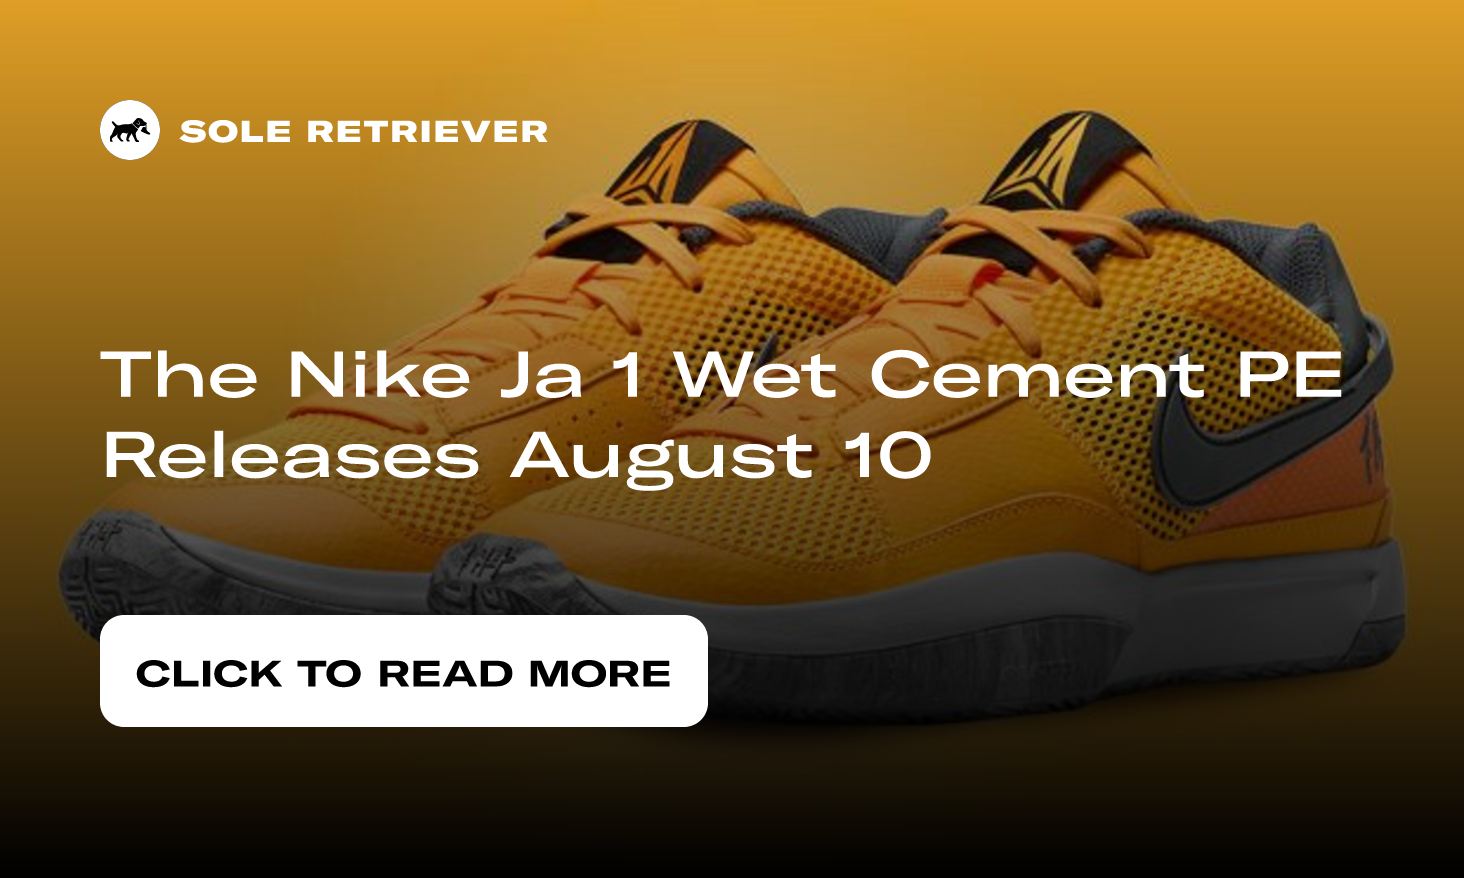 The Nike Ja 1 Wet Cement PE Releases August 10